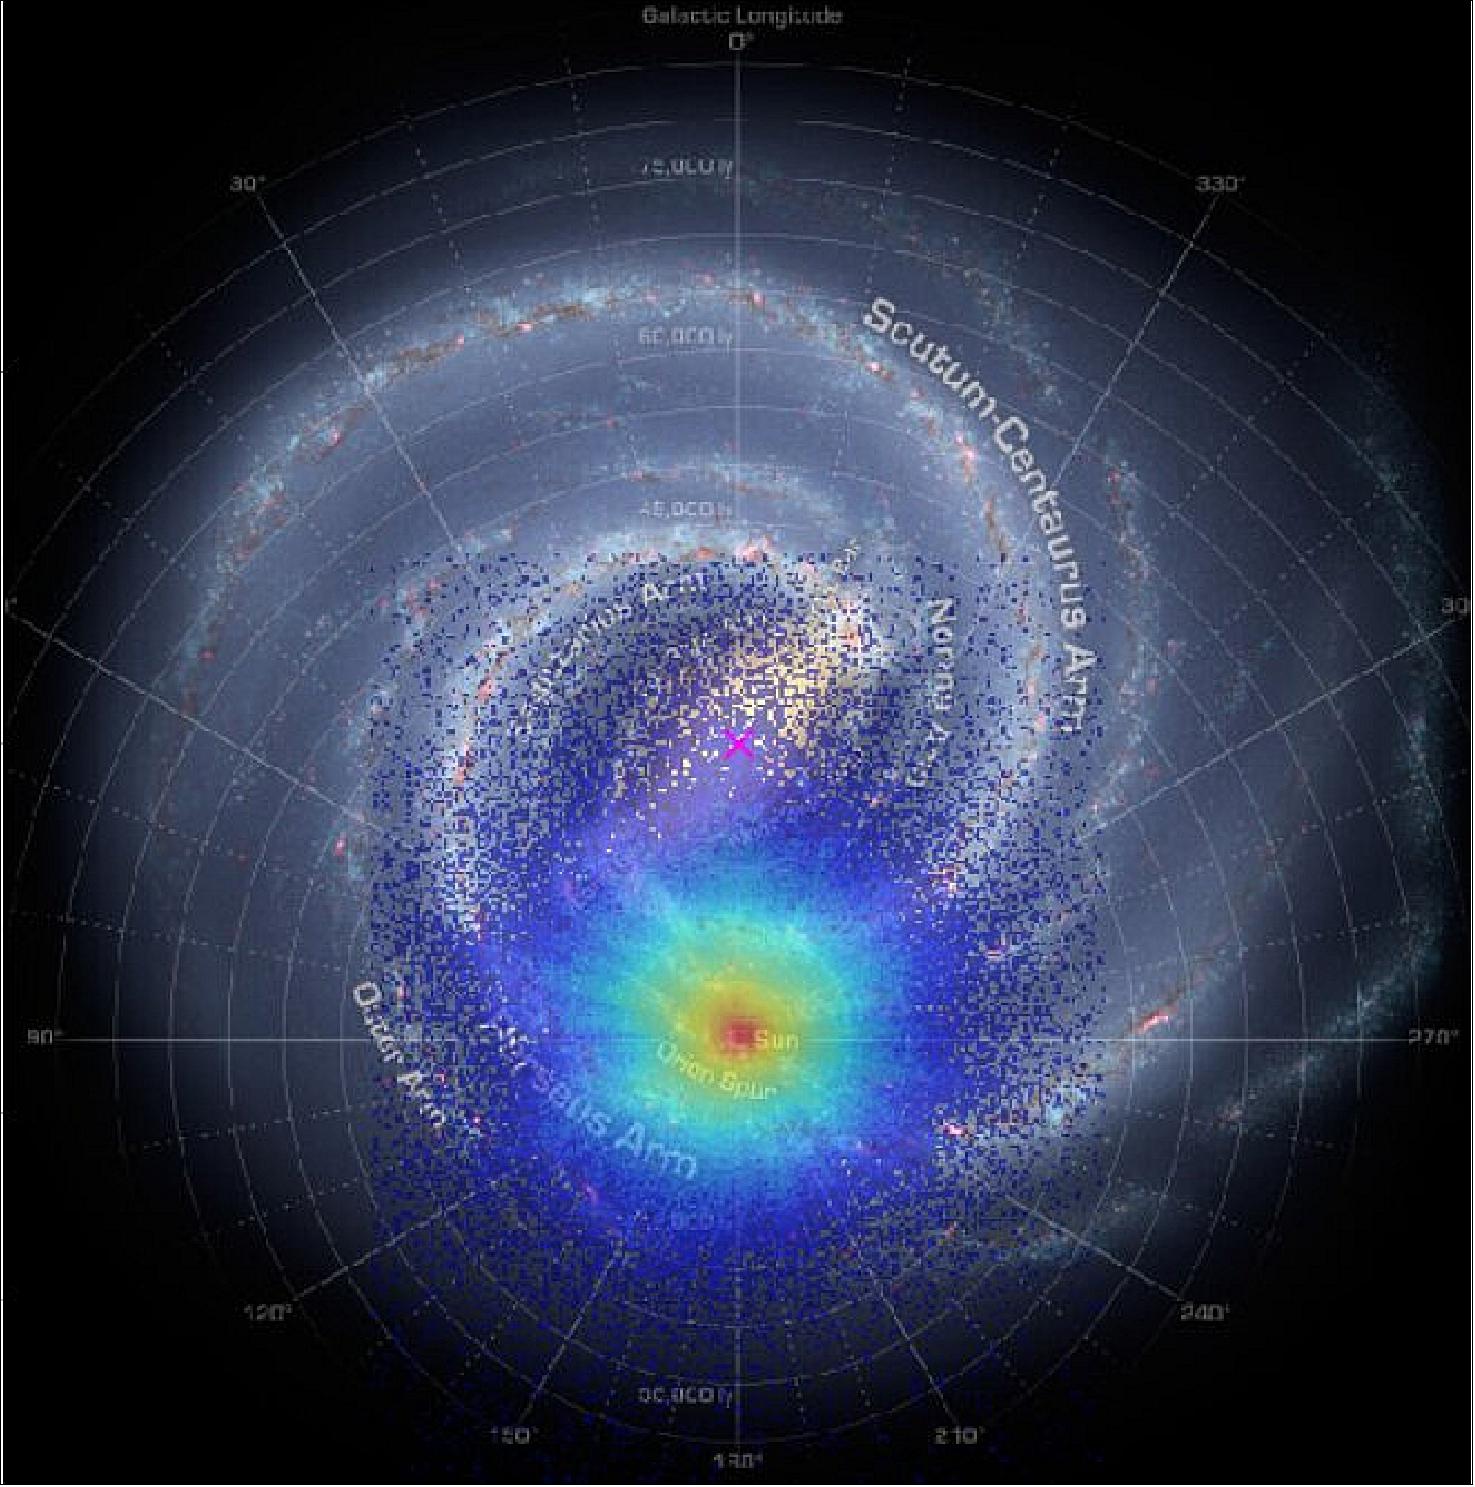 Figure 14: Distribution of 3 million stars used in this study to detect the star formation burst from 2-3 billion years ago. Gaia provided the distance for each of these objects on the galactic disc. Shown is a scheme of the spiral arms of the Milky Way (image credit: University of Barcelona)